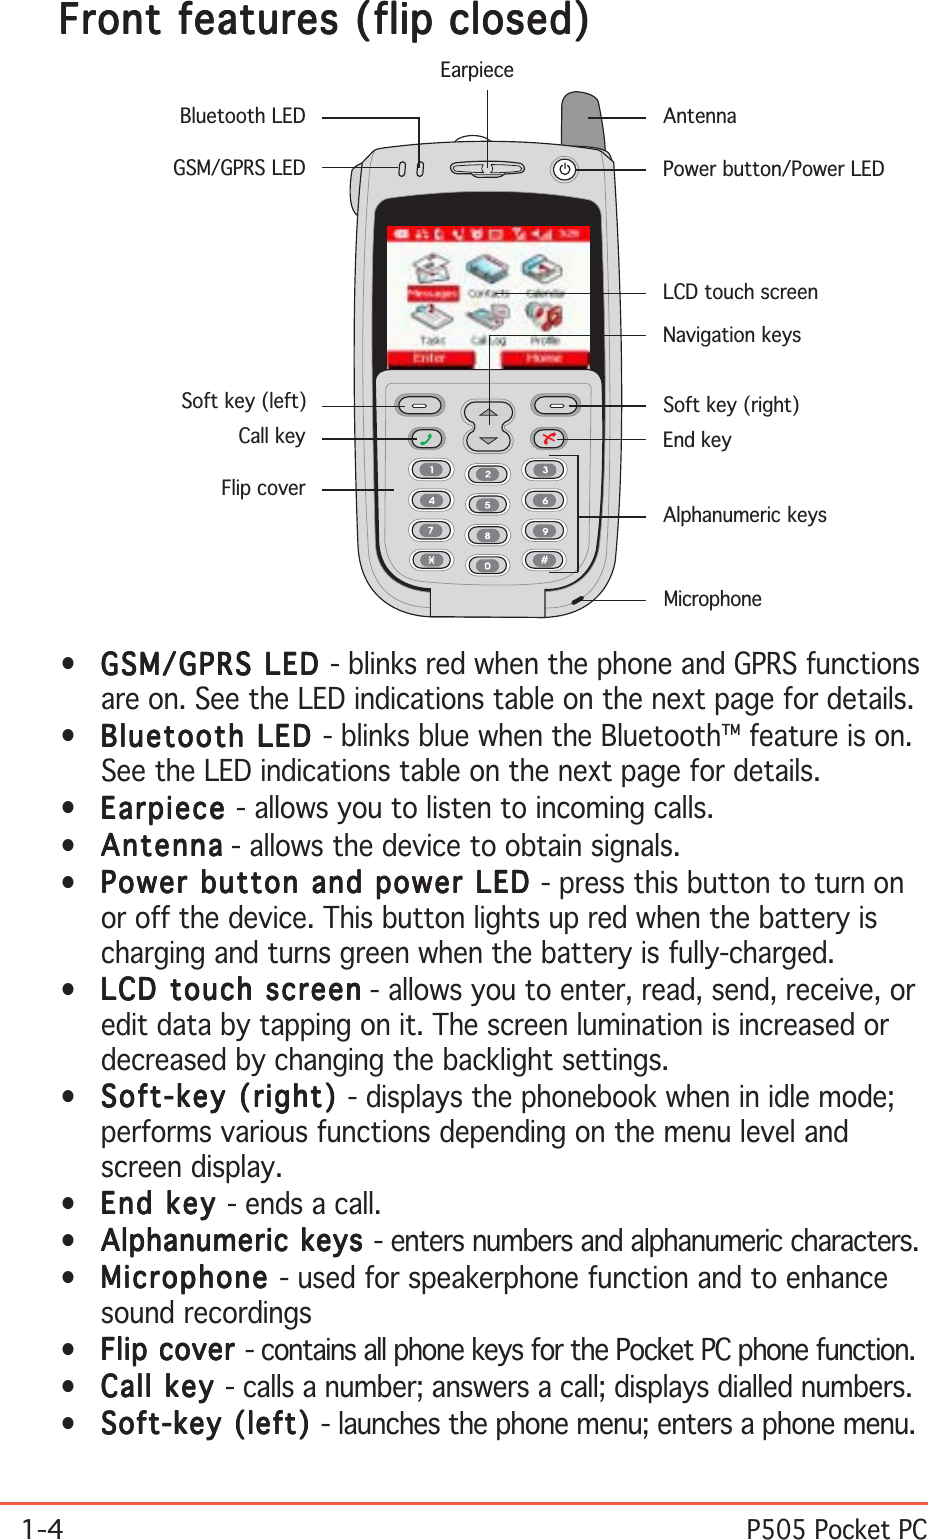 1-4P505 Pocket PC•GSM/GPRS LED GSM/GPRS LED GSM/GPRS LED GSM/GPRS LED GSM/GPRS LED - blinks red when the phone and GPRS functionsare on. See the LED indications table on the next page for details.•Bluetooth LED Bluetooth LED Bluetooth LED Bluetooth LED Bluetooth LED - blinks blue when the Bluetooth™ feature is on.See the LED indications table on the next page for details.•EarpieceEarpieceEarpieceEarpieceEarpiece - allows you to listen to incoming calls.•AntennaAntennaAntennaAntennaAntenn a - allows the device to obtain signals.•Power button and power LED Power button and power LED Power button and power LED Power button and power LED Power button and power LED - press this button to turn onor off the device. This button lights up red when the battery ischarging and turns green when the battery is fully-charged.•LCD touch screenLCD touch screenLCD touch screenLCD touch screenLCD touch screen - allows you to enter, read, send, receive, oredit data by tapping on it. The screen lumination is increased ordecreased by changing the backlight settings.•Soft-key (right) Soft-key (right) Soft-key (right) Soft-key (right) Soft-key (right) - displays the phonebook when in idle mode;performs various functions depending on the menu level andscreen display.•End key End key End key End key End key - ends a call.•Alphanumeric keys Alphanumeric keys Alphanumeric keys Alphanumeric keys Alphanumeric keys - enters numbers and alphanumeric characters.•MicrophoneMicrophoneMicrophoneMicrophoneMicrophone - used for speakerphone function and to enhancesound recordings•Flip cover Flip cover Flip cover Flip cover Flip cover - contains all phone keys for the Pocket PC phone function.•Call key Call key Call key Call key Call key - calls a number; answers a call; displays dialled numbers.•Soft-key (left) Soft-key (left) Soft-key (left) Soft-key (left) Soft-key (left) - launches the phone menu; enters a phone menu.Front features (flip closed)Front features (flip closed)Front features (flip closed)Front features (flip closed)Front features (flip closed)LCD touch screenCall keyFlip coverPower button/Power LEDAntennaGSM/GPRS LEDBluetooth LEDNavigation keysSoft key (right)End keySoft key (left)EarpieceAlphanumeric keysMicrophone